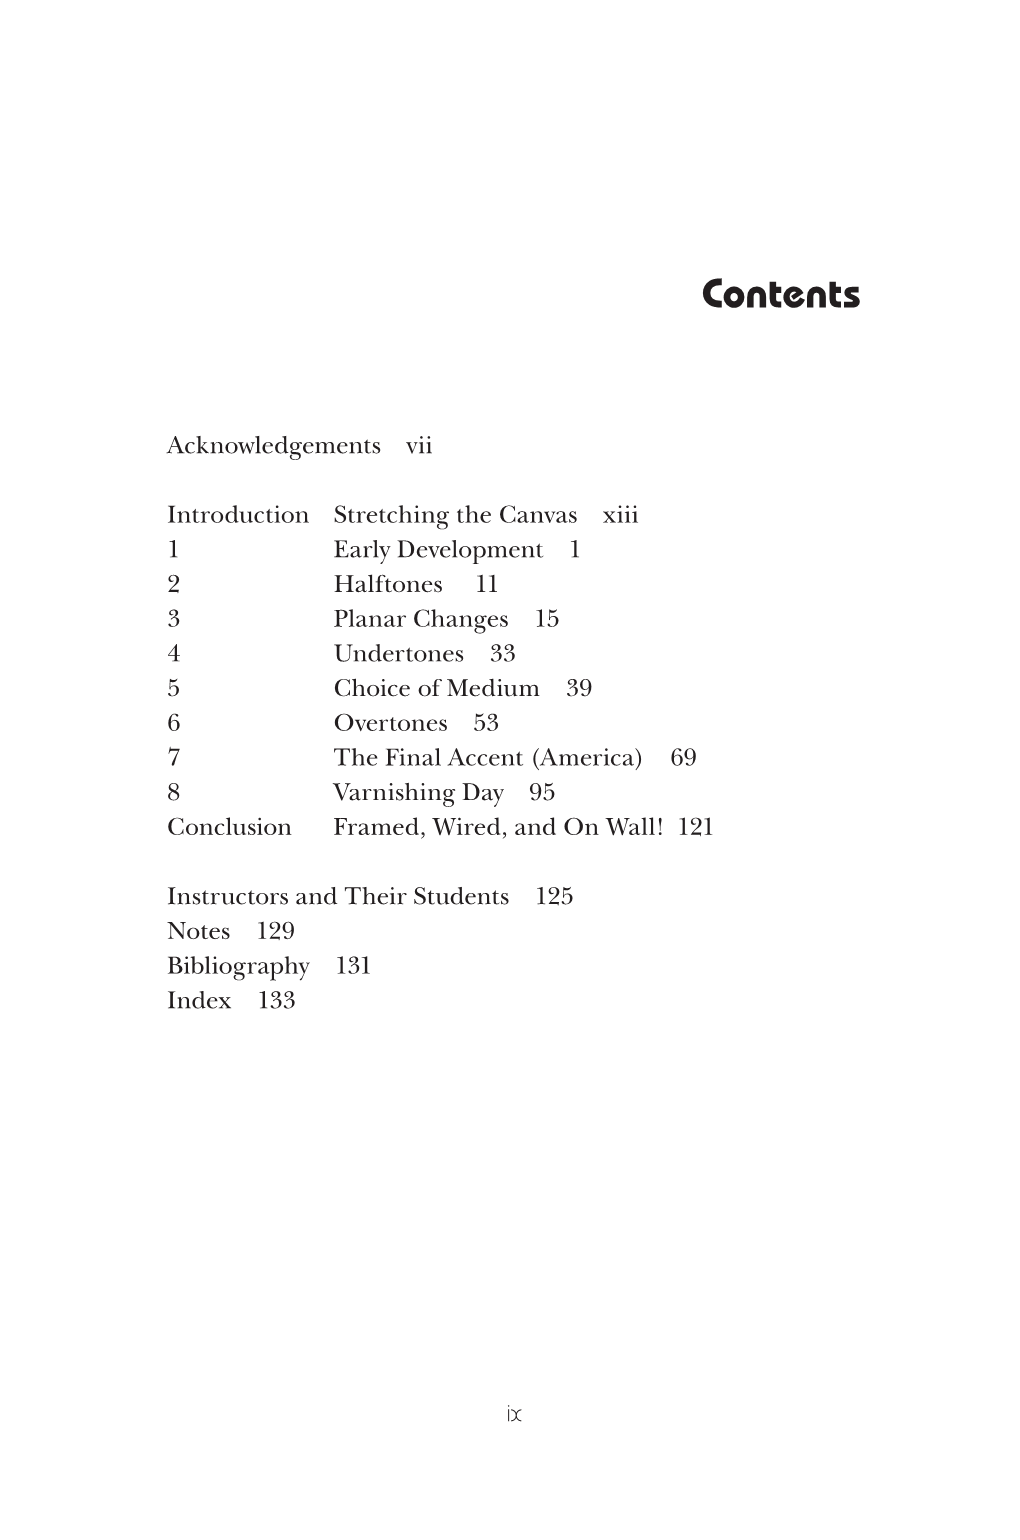 To View the Table of Contents and Selected Pages from This Book